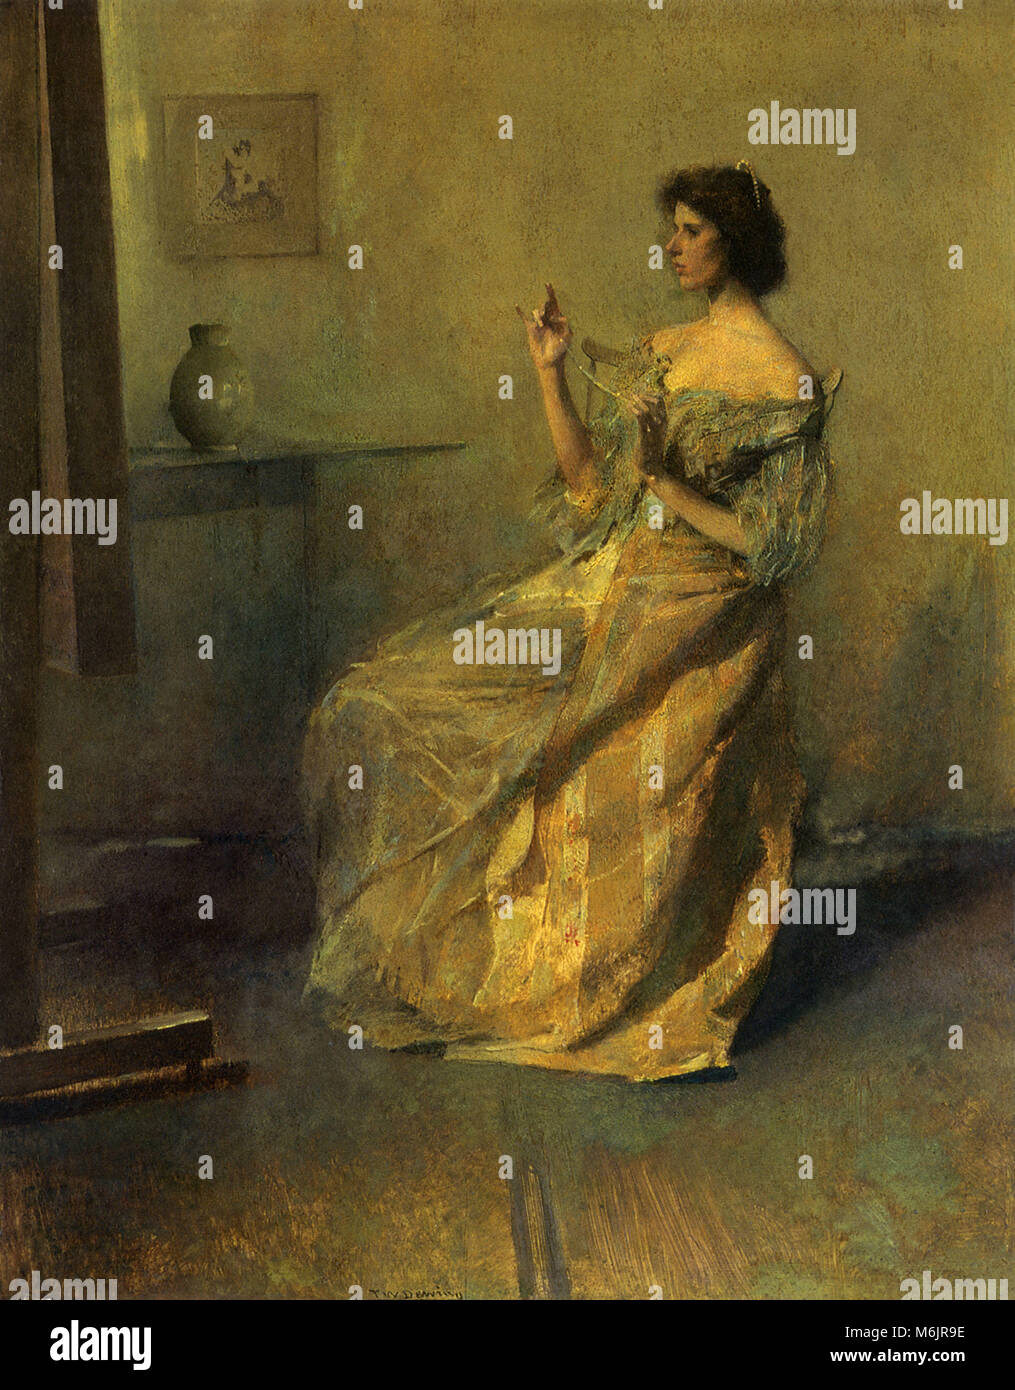 The Necklace, Dewing, Thomas, 1907. Stock Photo